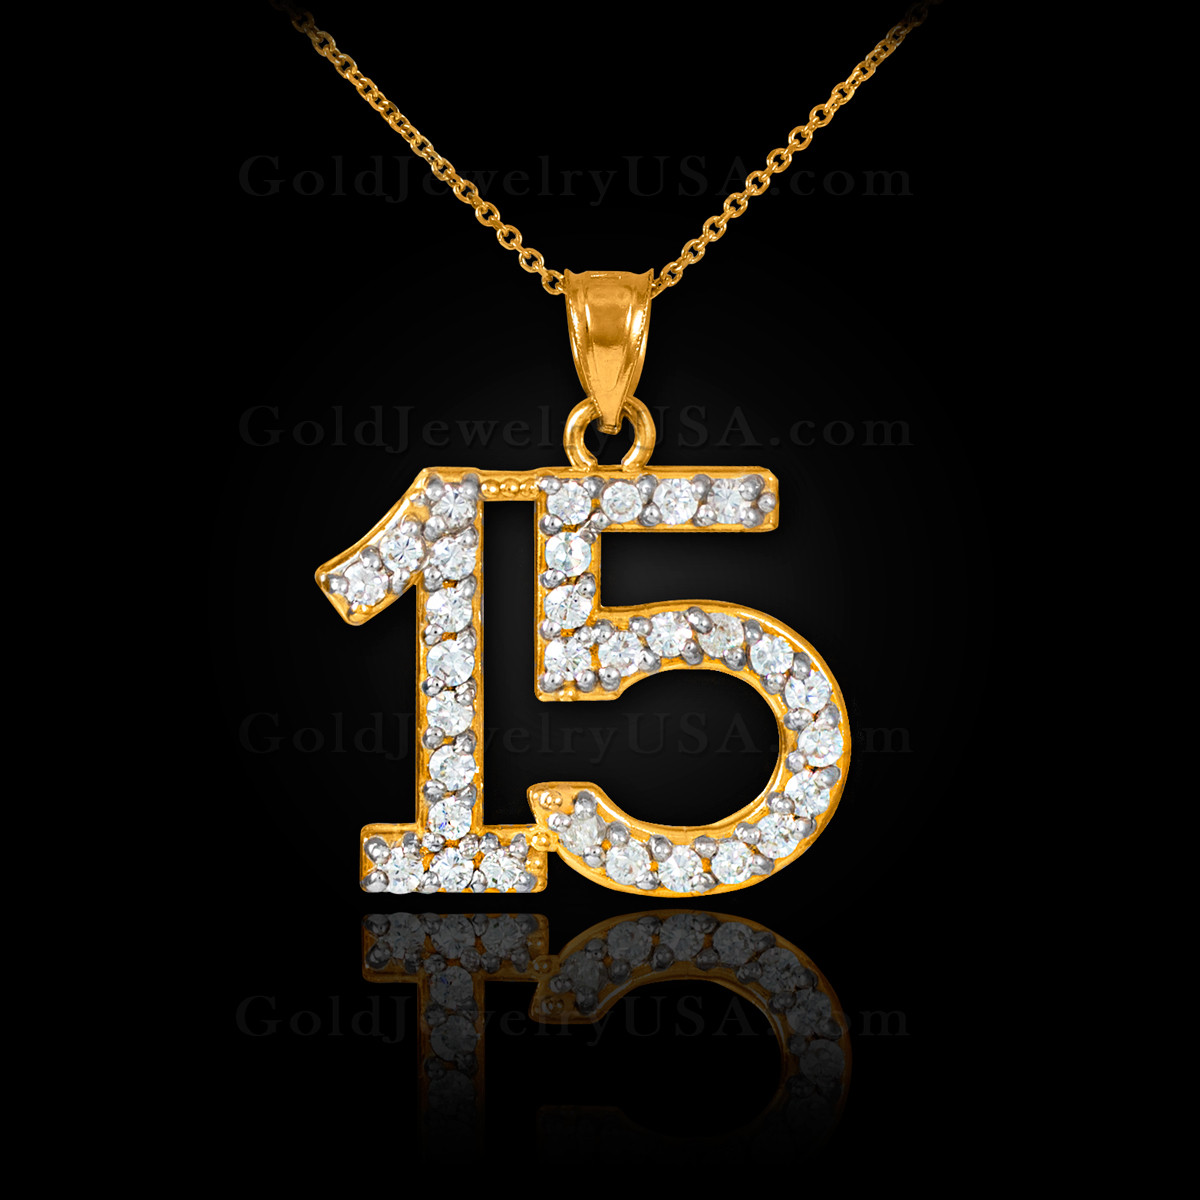 Quinceanera Necklace 14K GOLD Gold 15 Anos Collar